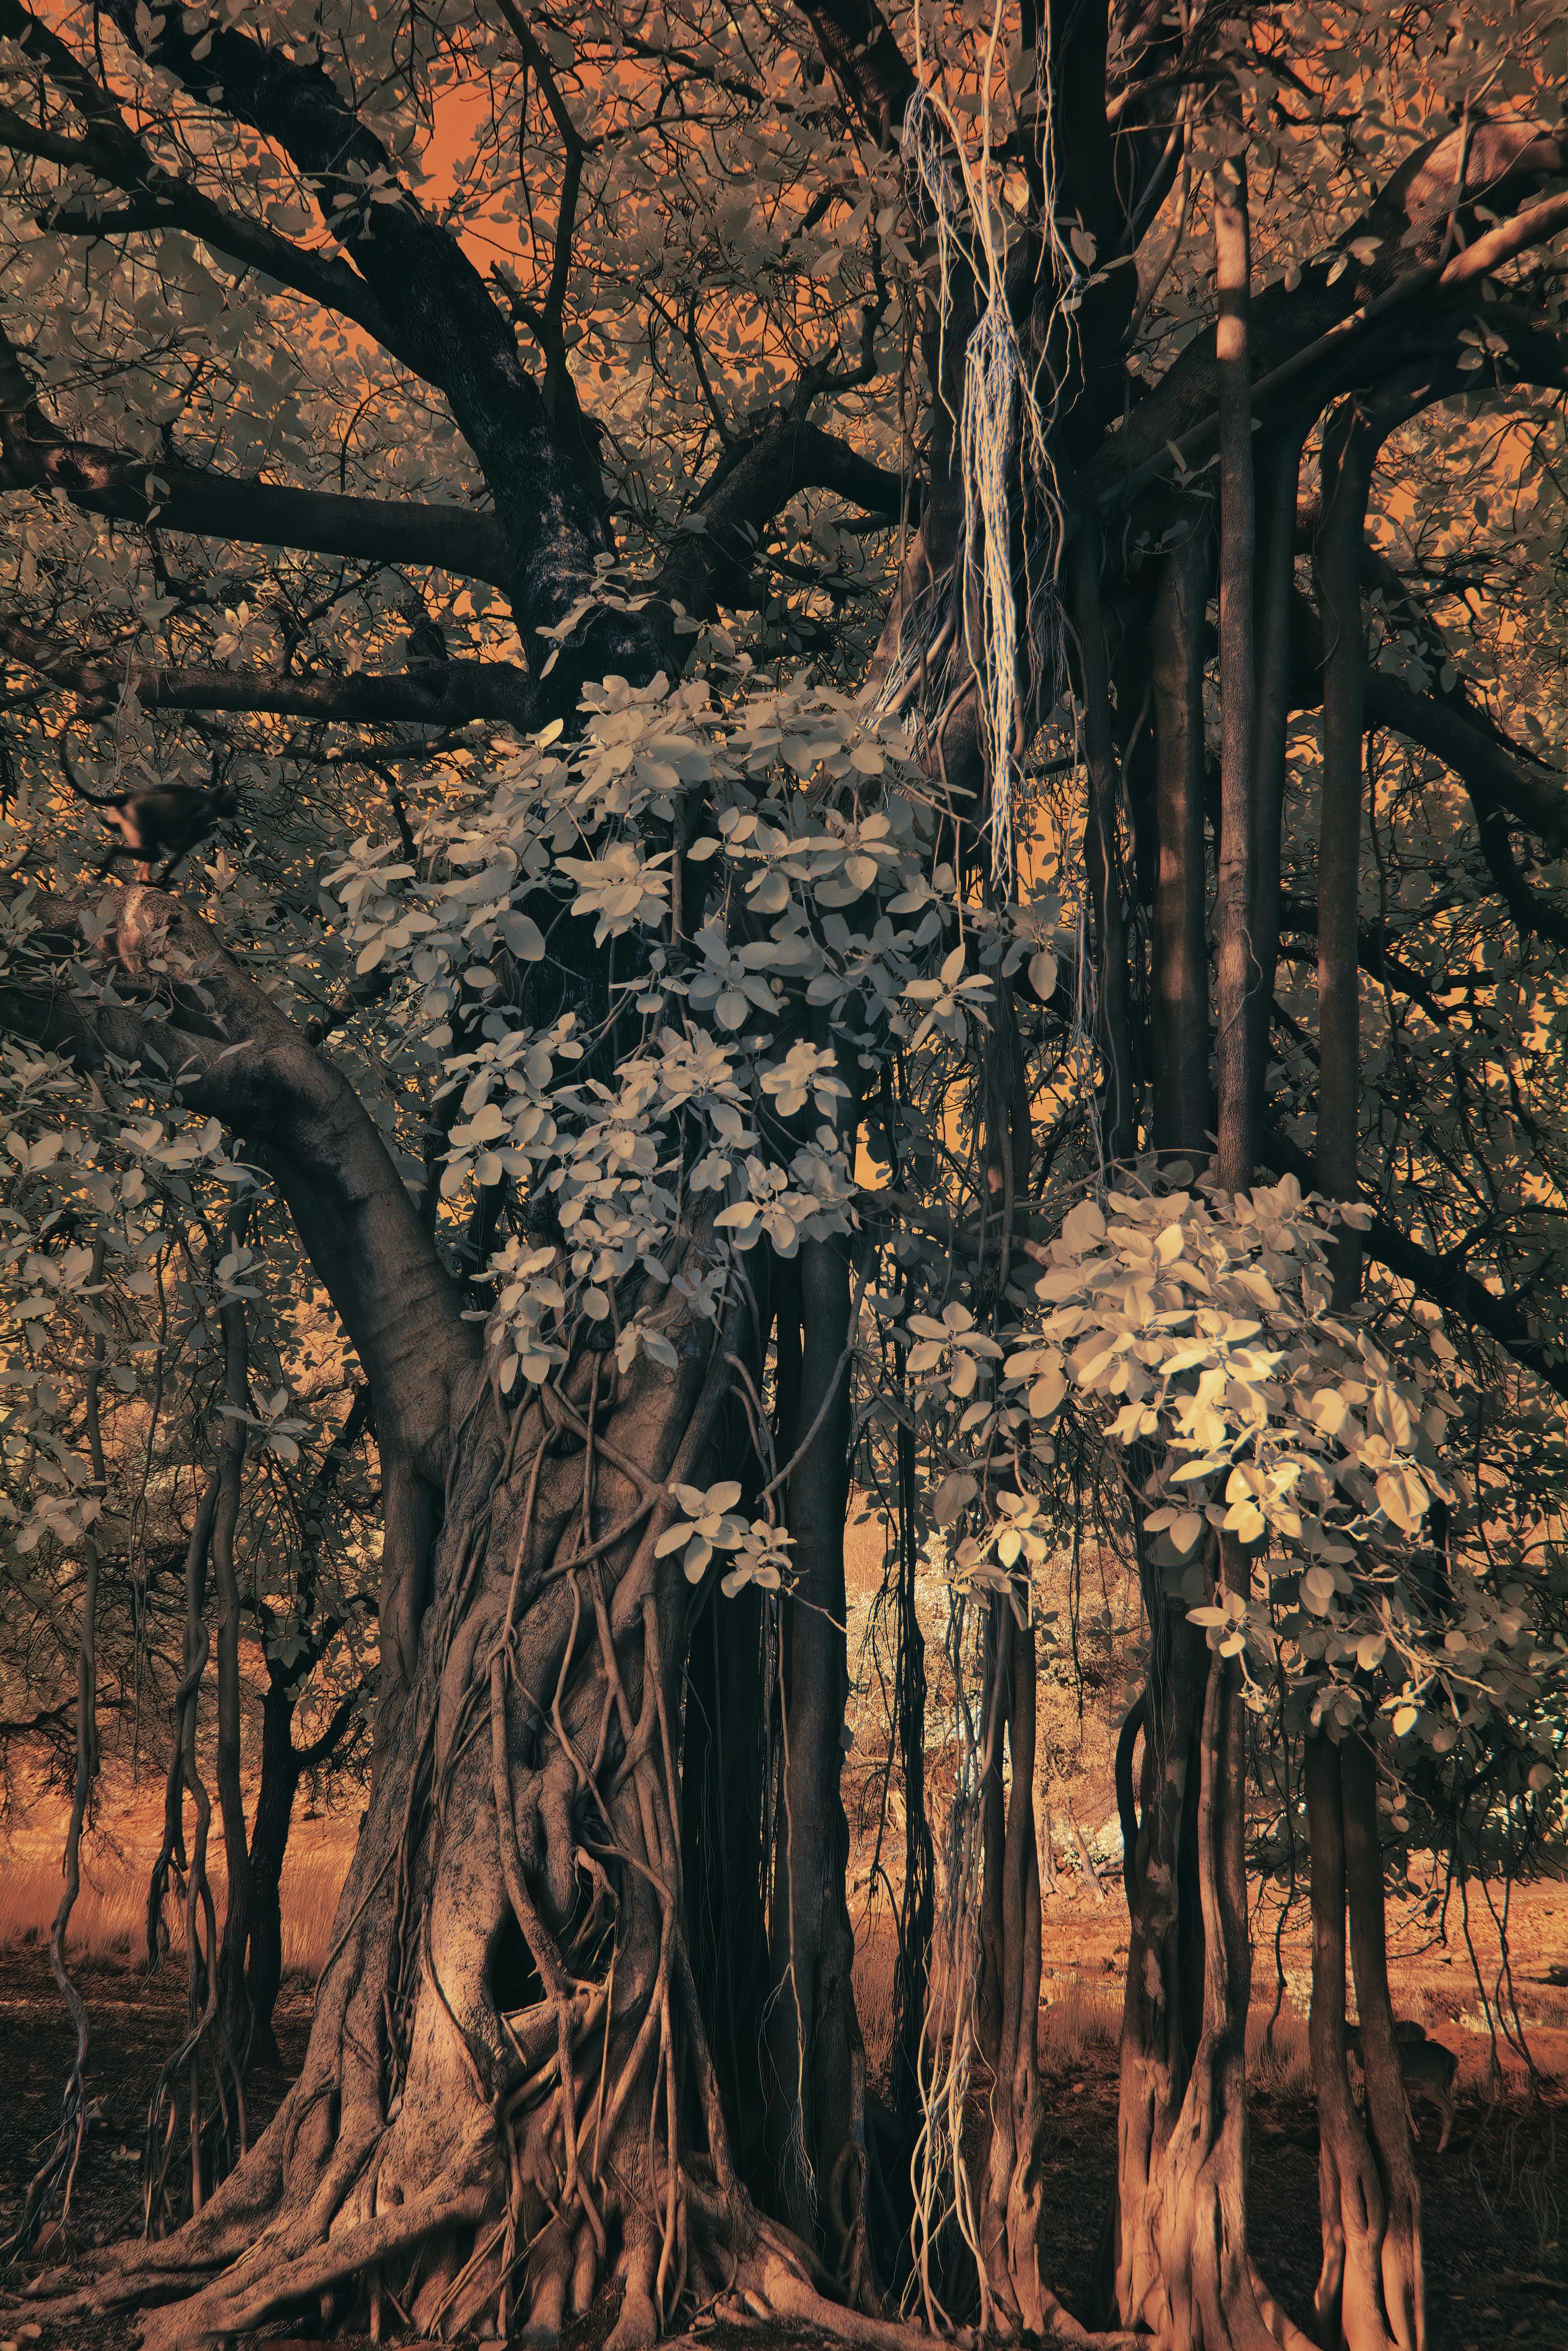 Aditya Dicky Singh Color Photograph - Large Landscape Nature Wildlife Photograph India Banyan Tree Orange Brown Forest